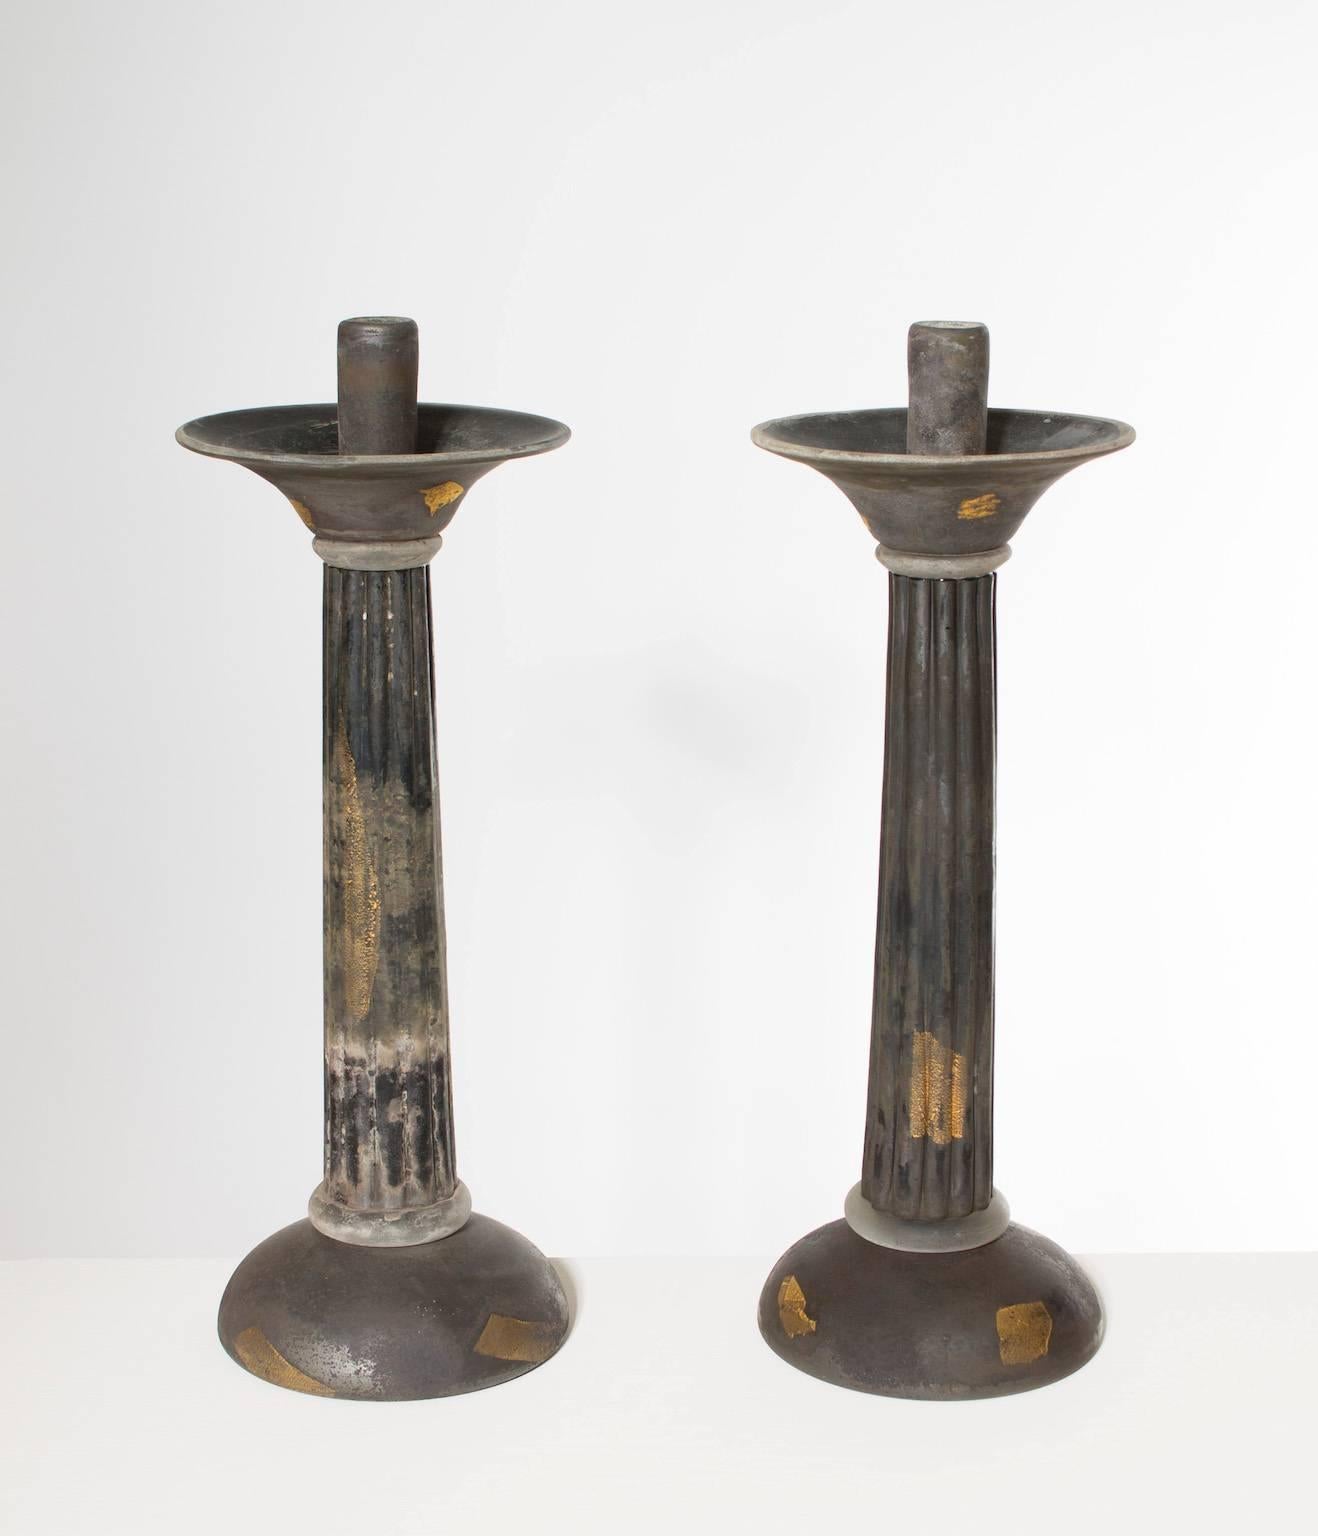 Italian Venetian, pair of candlestick, blown Murano glass, in opaque dark grey with gold stains, entirely handcrafted in blown Murano glass, by the Murano artist Cenedese. On the back of the candlestick there is the signature.
These portraits are